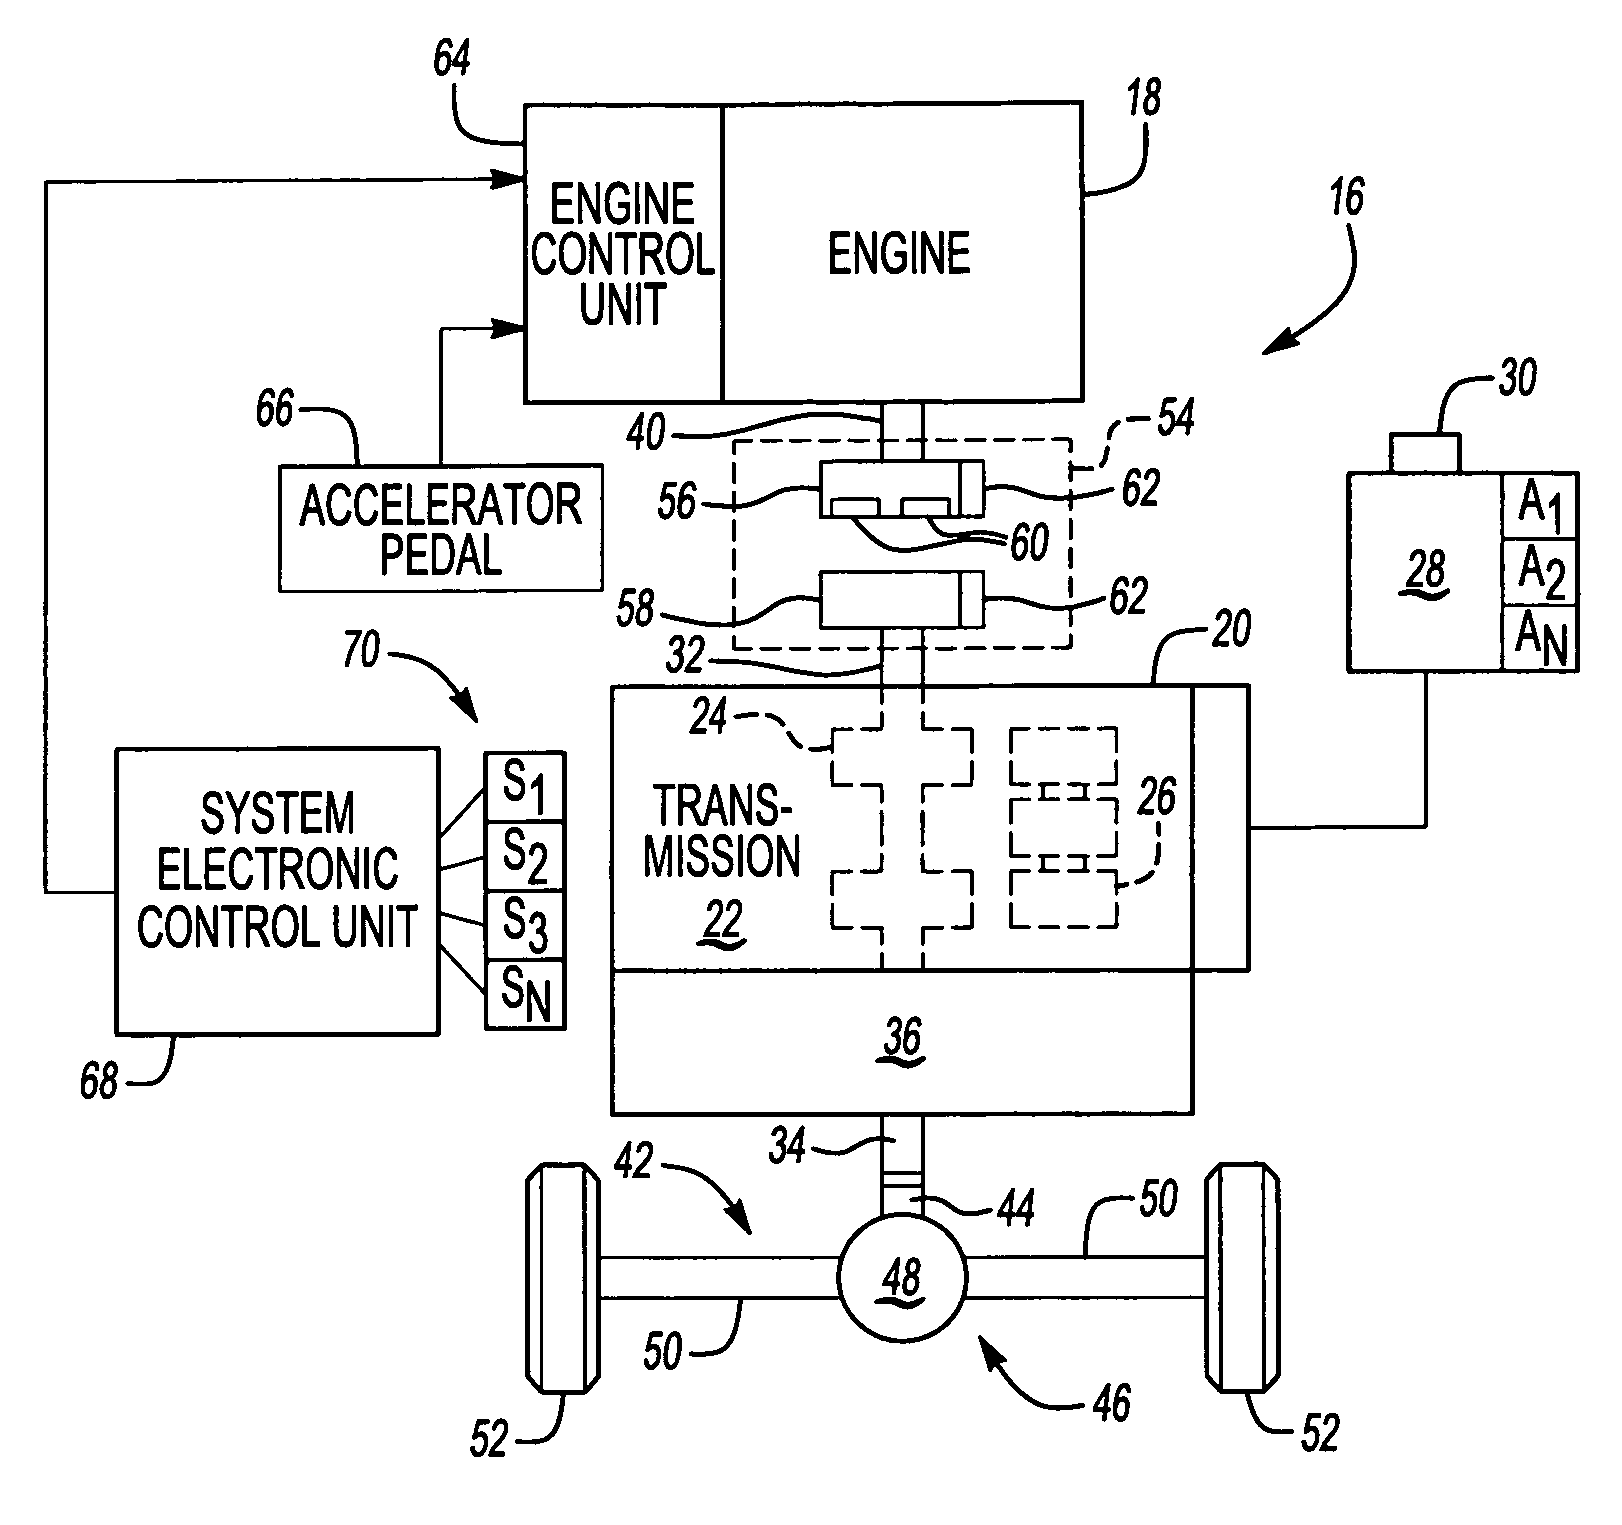 Centrifugal clutch assembly with dedicated maneuvering mode